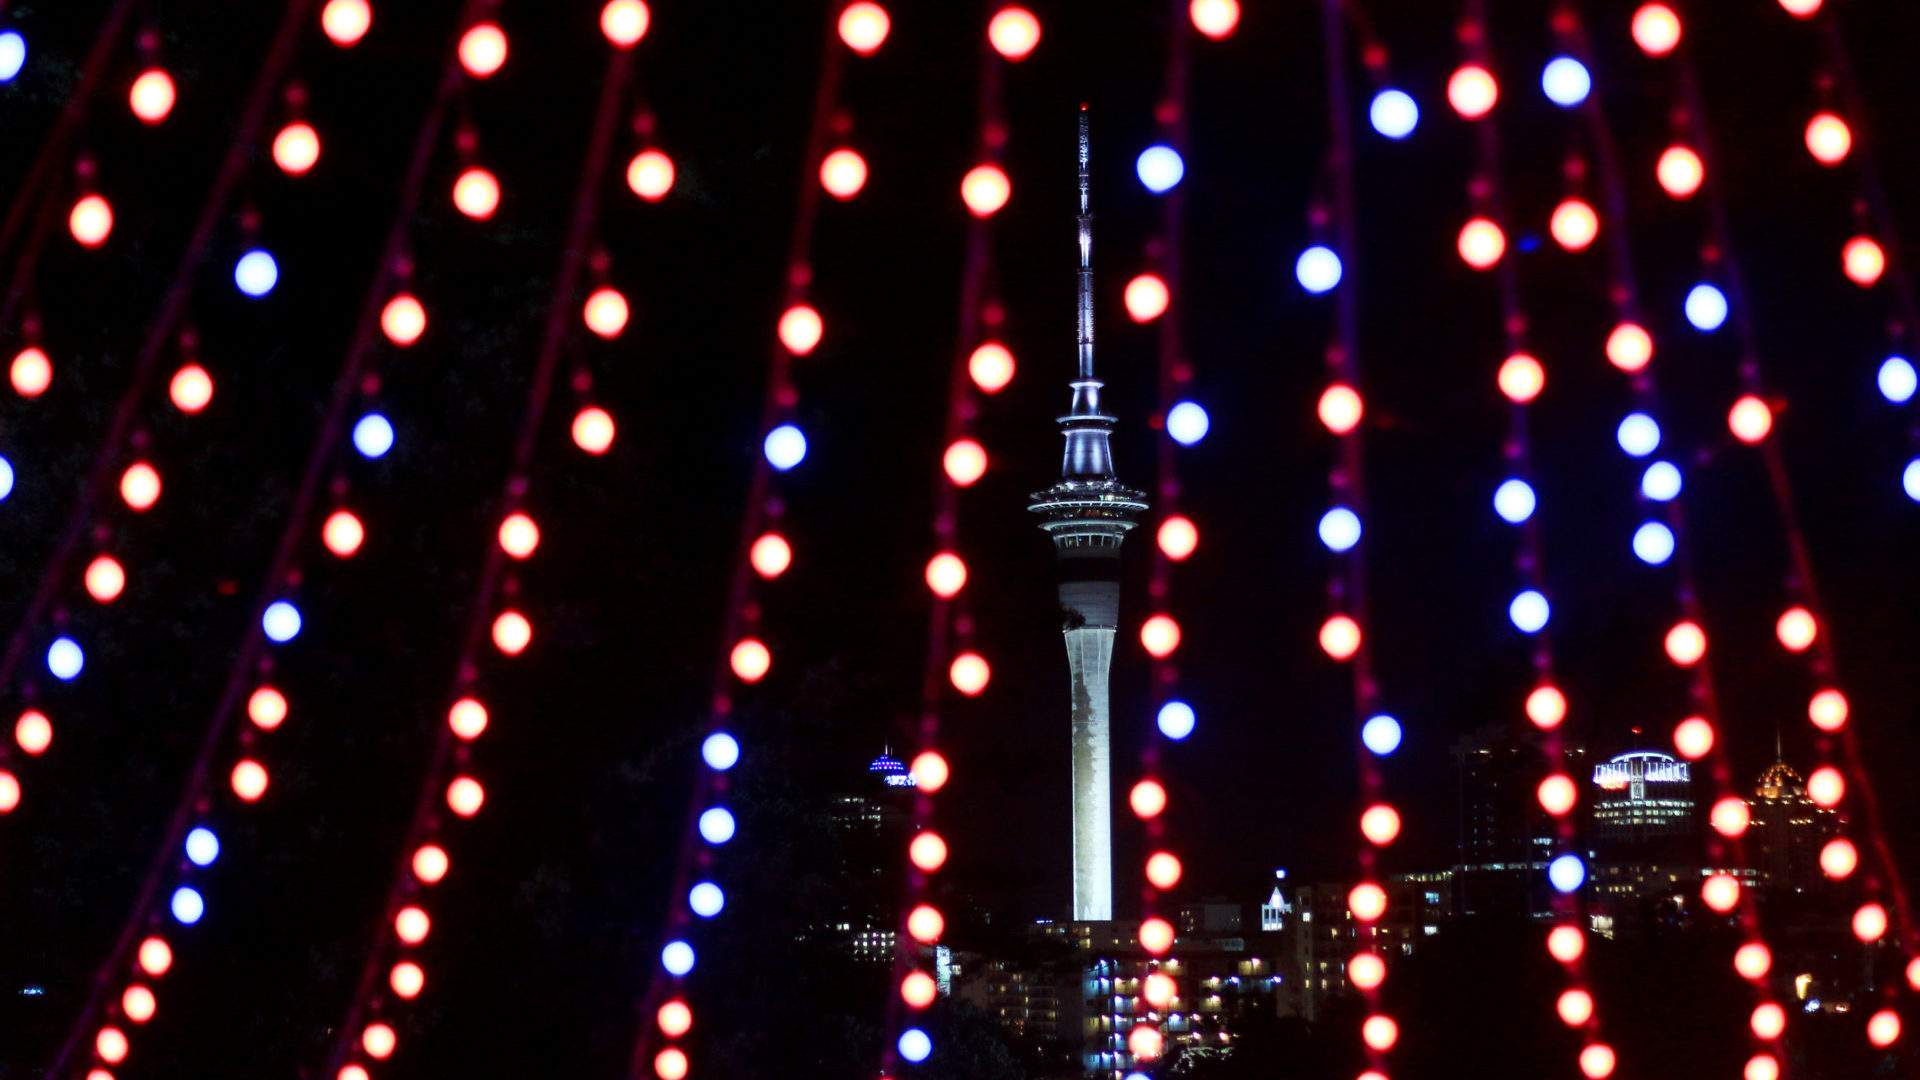 A New Light Installation and Festival is Coming to the Viaduct Harbour